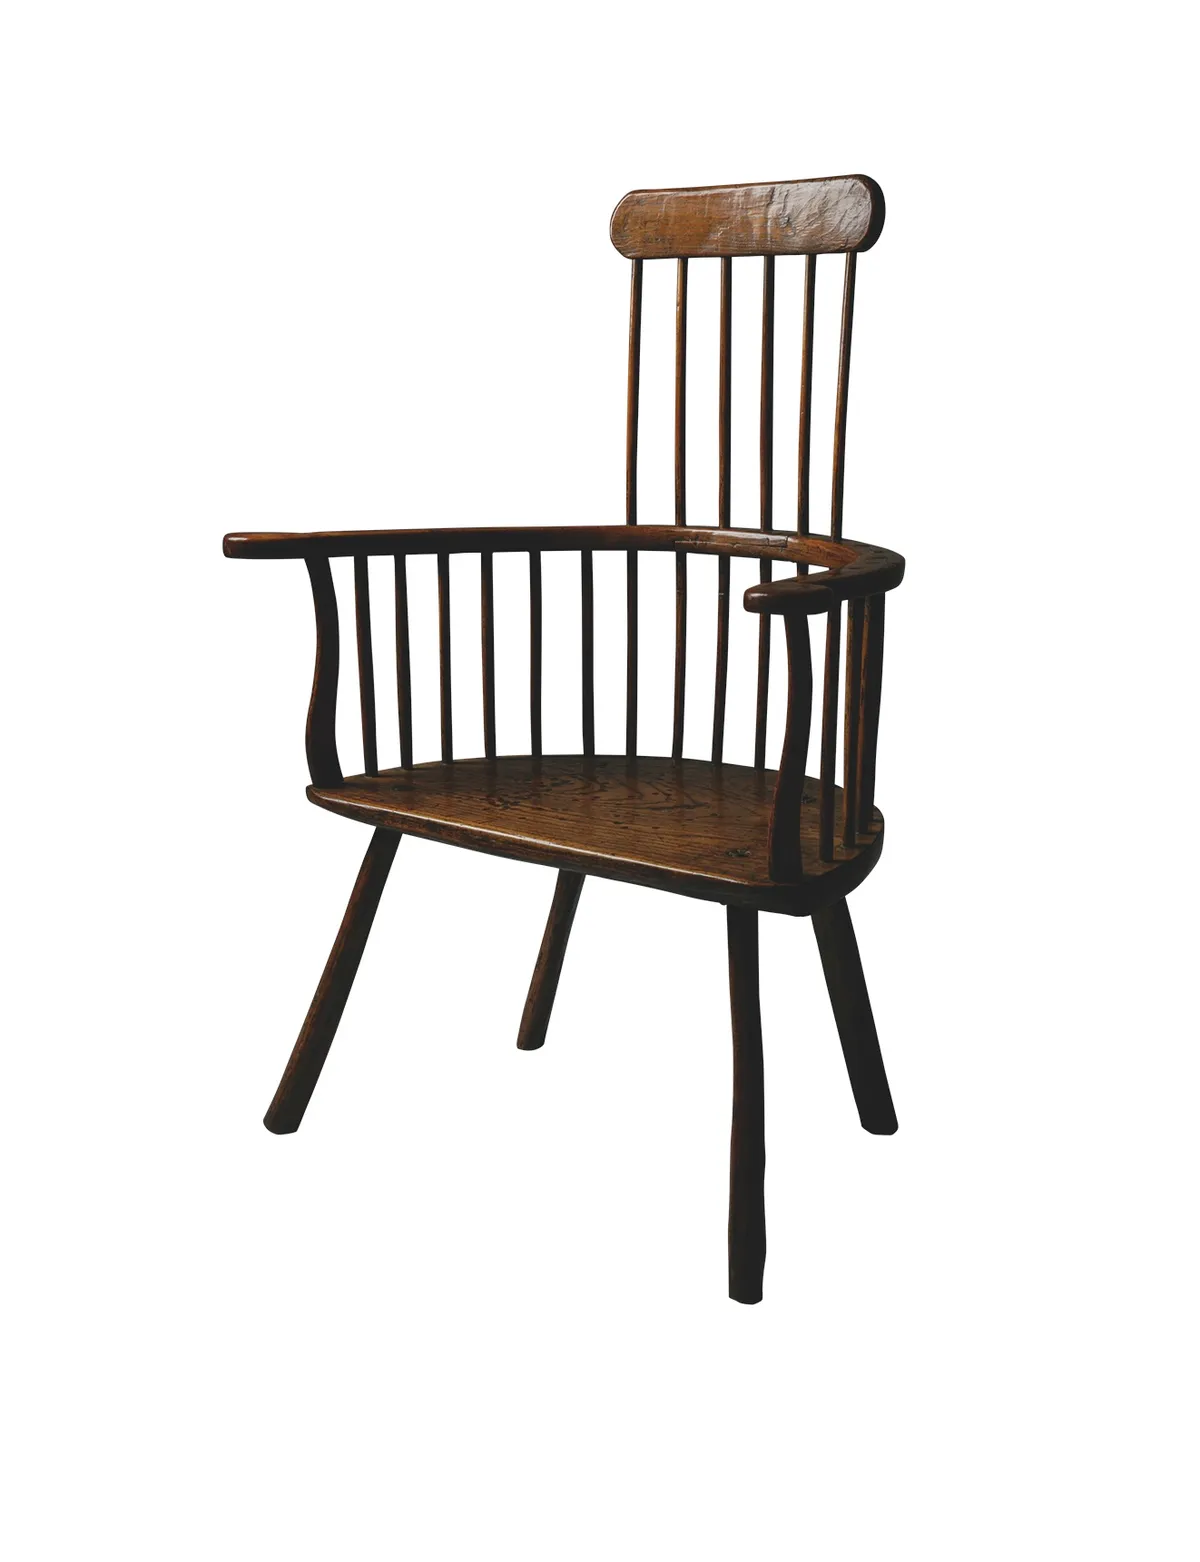 A ‘collector’s dream’ – late 18th-century ash chair with one-piece sycamore arm and seat, original paint and later varnish.